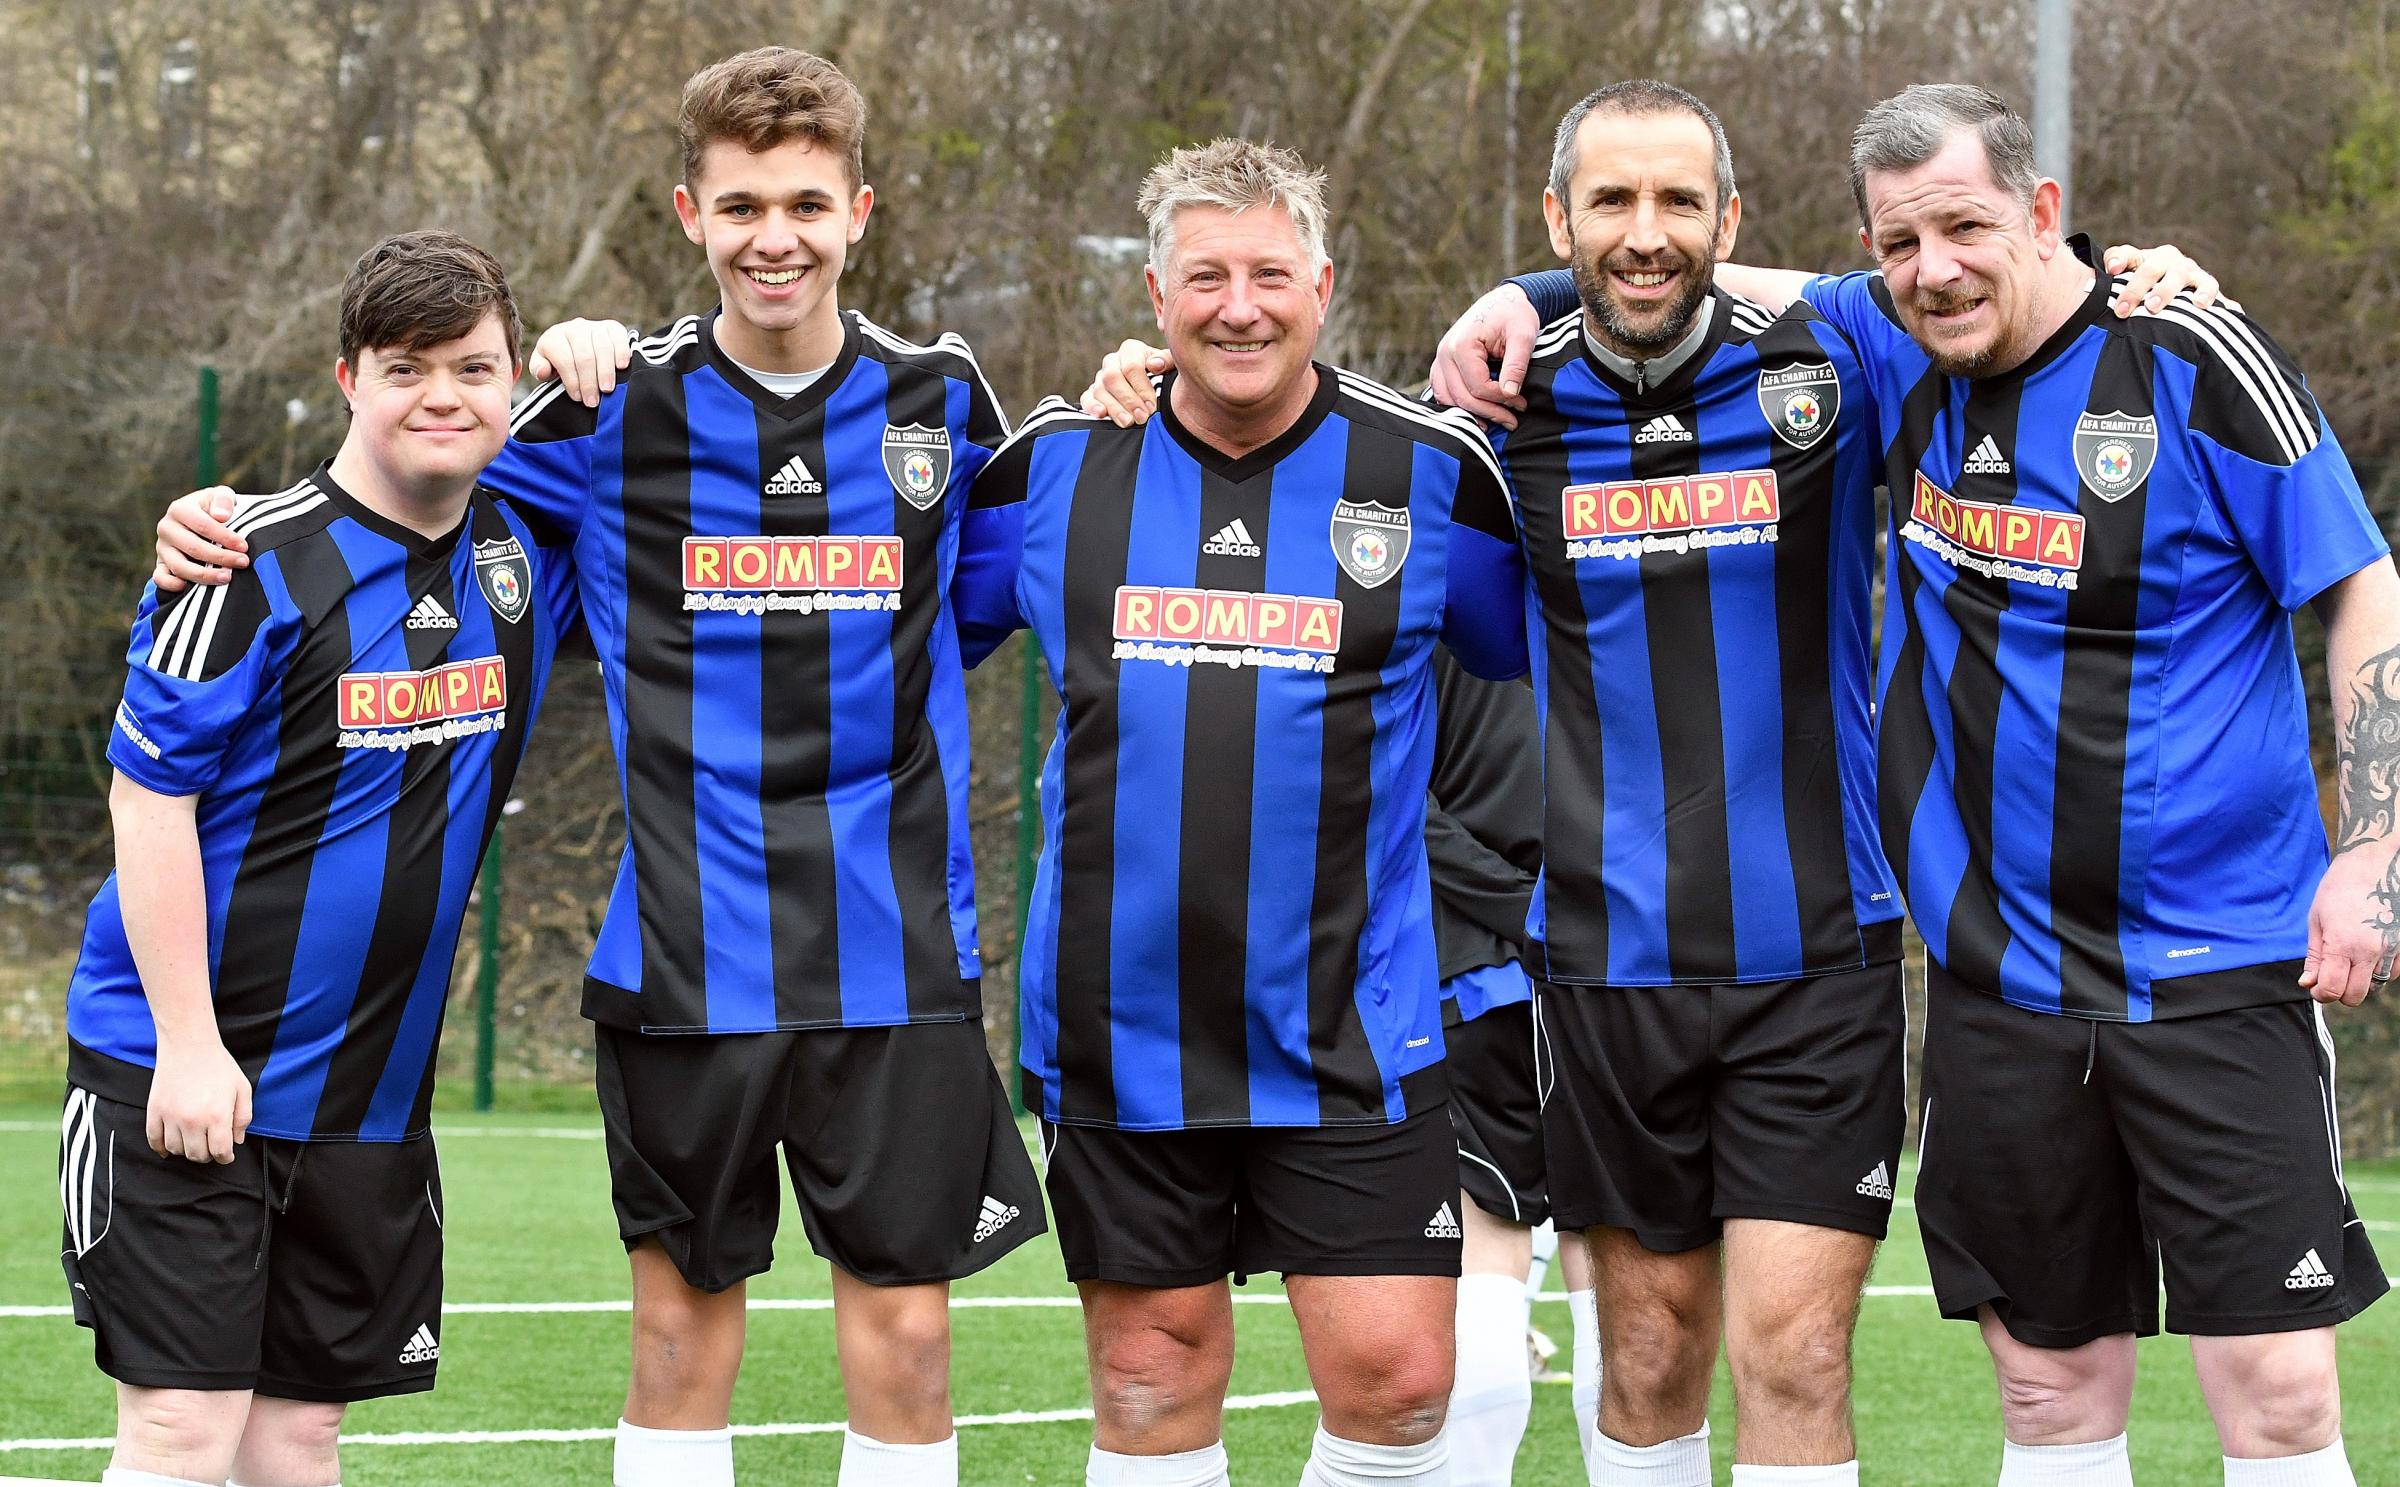 Stars play in football match to ‘break down barriers’